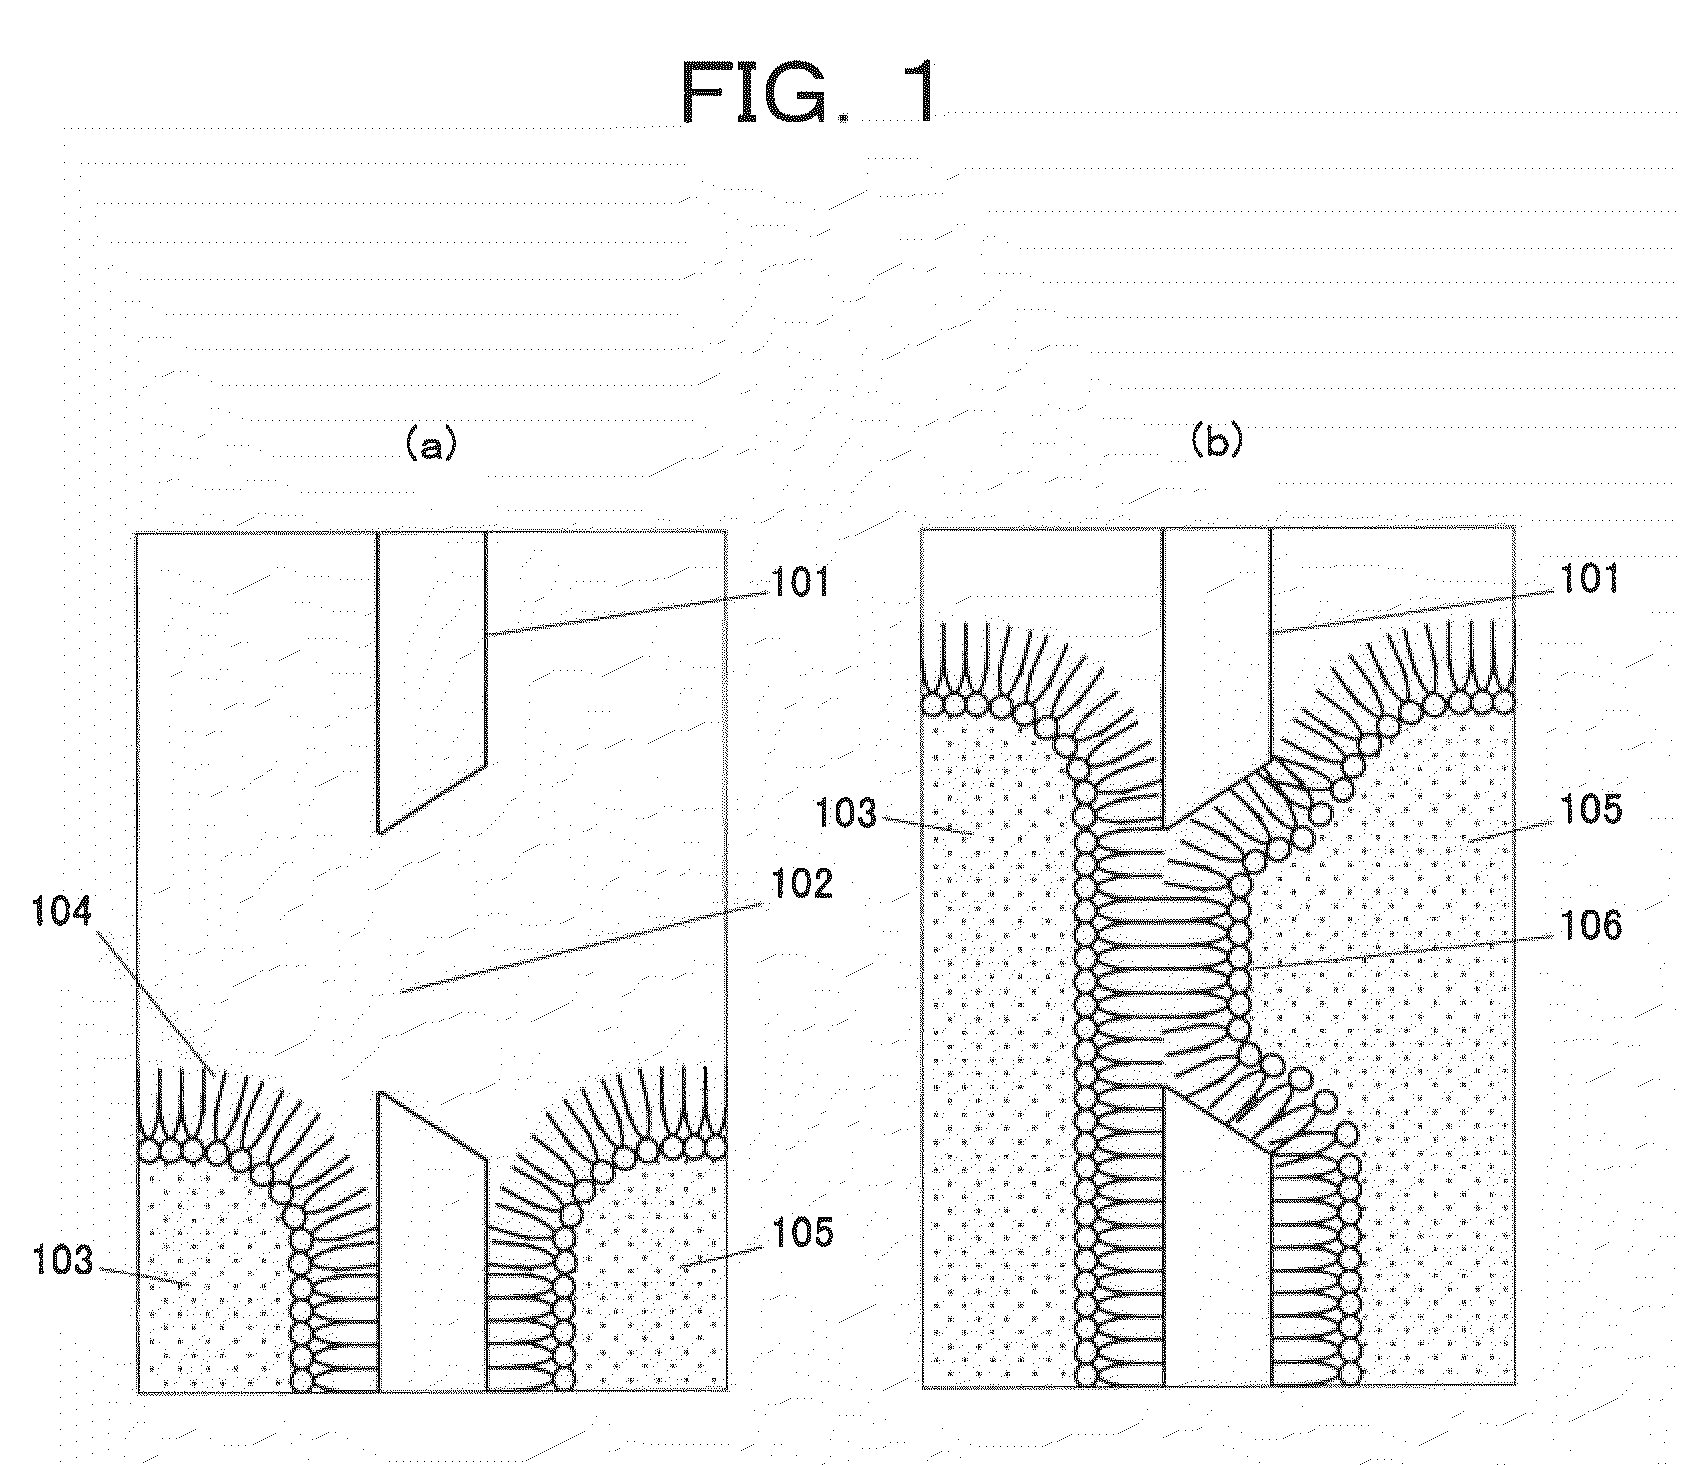 Method of forming bilayer membrane by contact between amphipathic monolayers and apparatus therefor